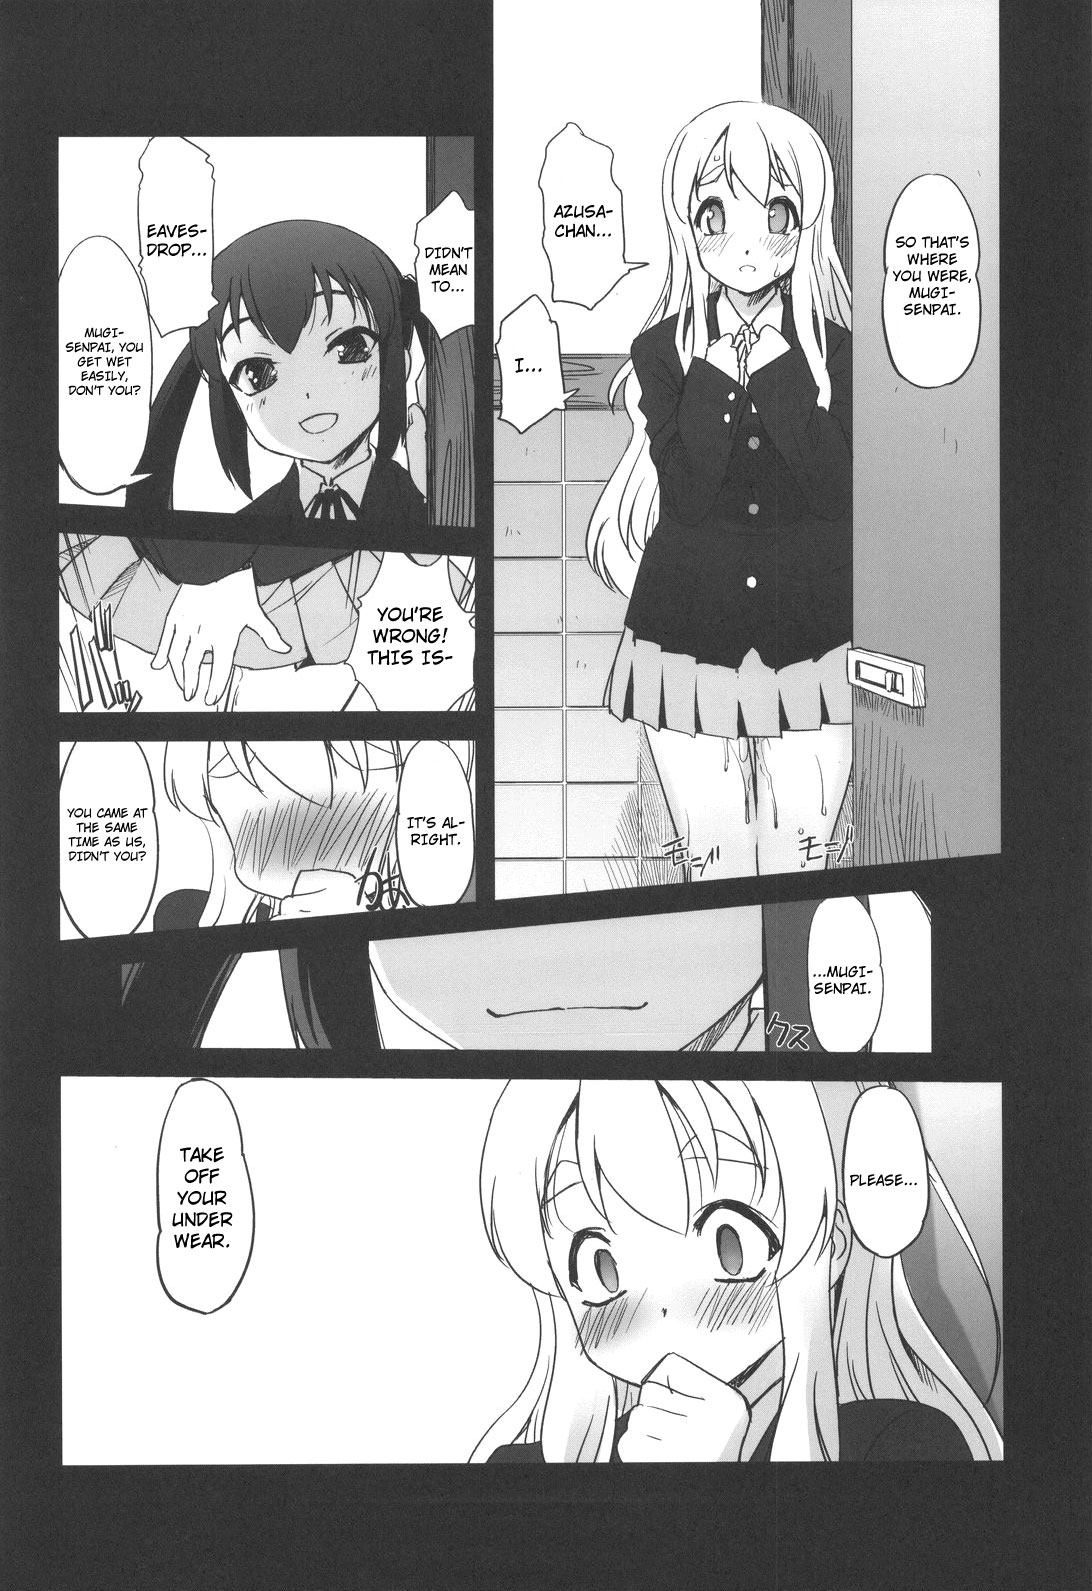 (C76) [G-Power! (Sasayuki)] Nekomimi to Toilet to Houkago no Bushitsu | Cat Ears And A Restroom And The Club Room After School (K-ON) [English] [Nicchiscans-4Dawgz] 16